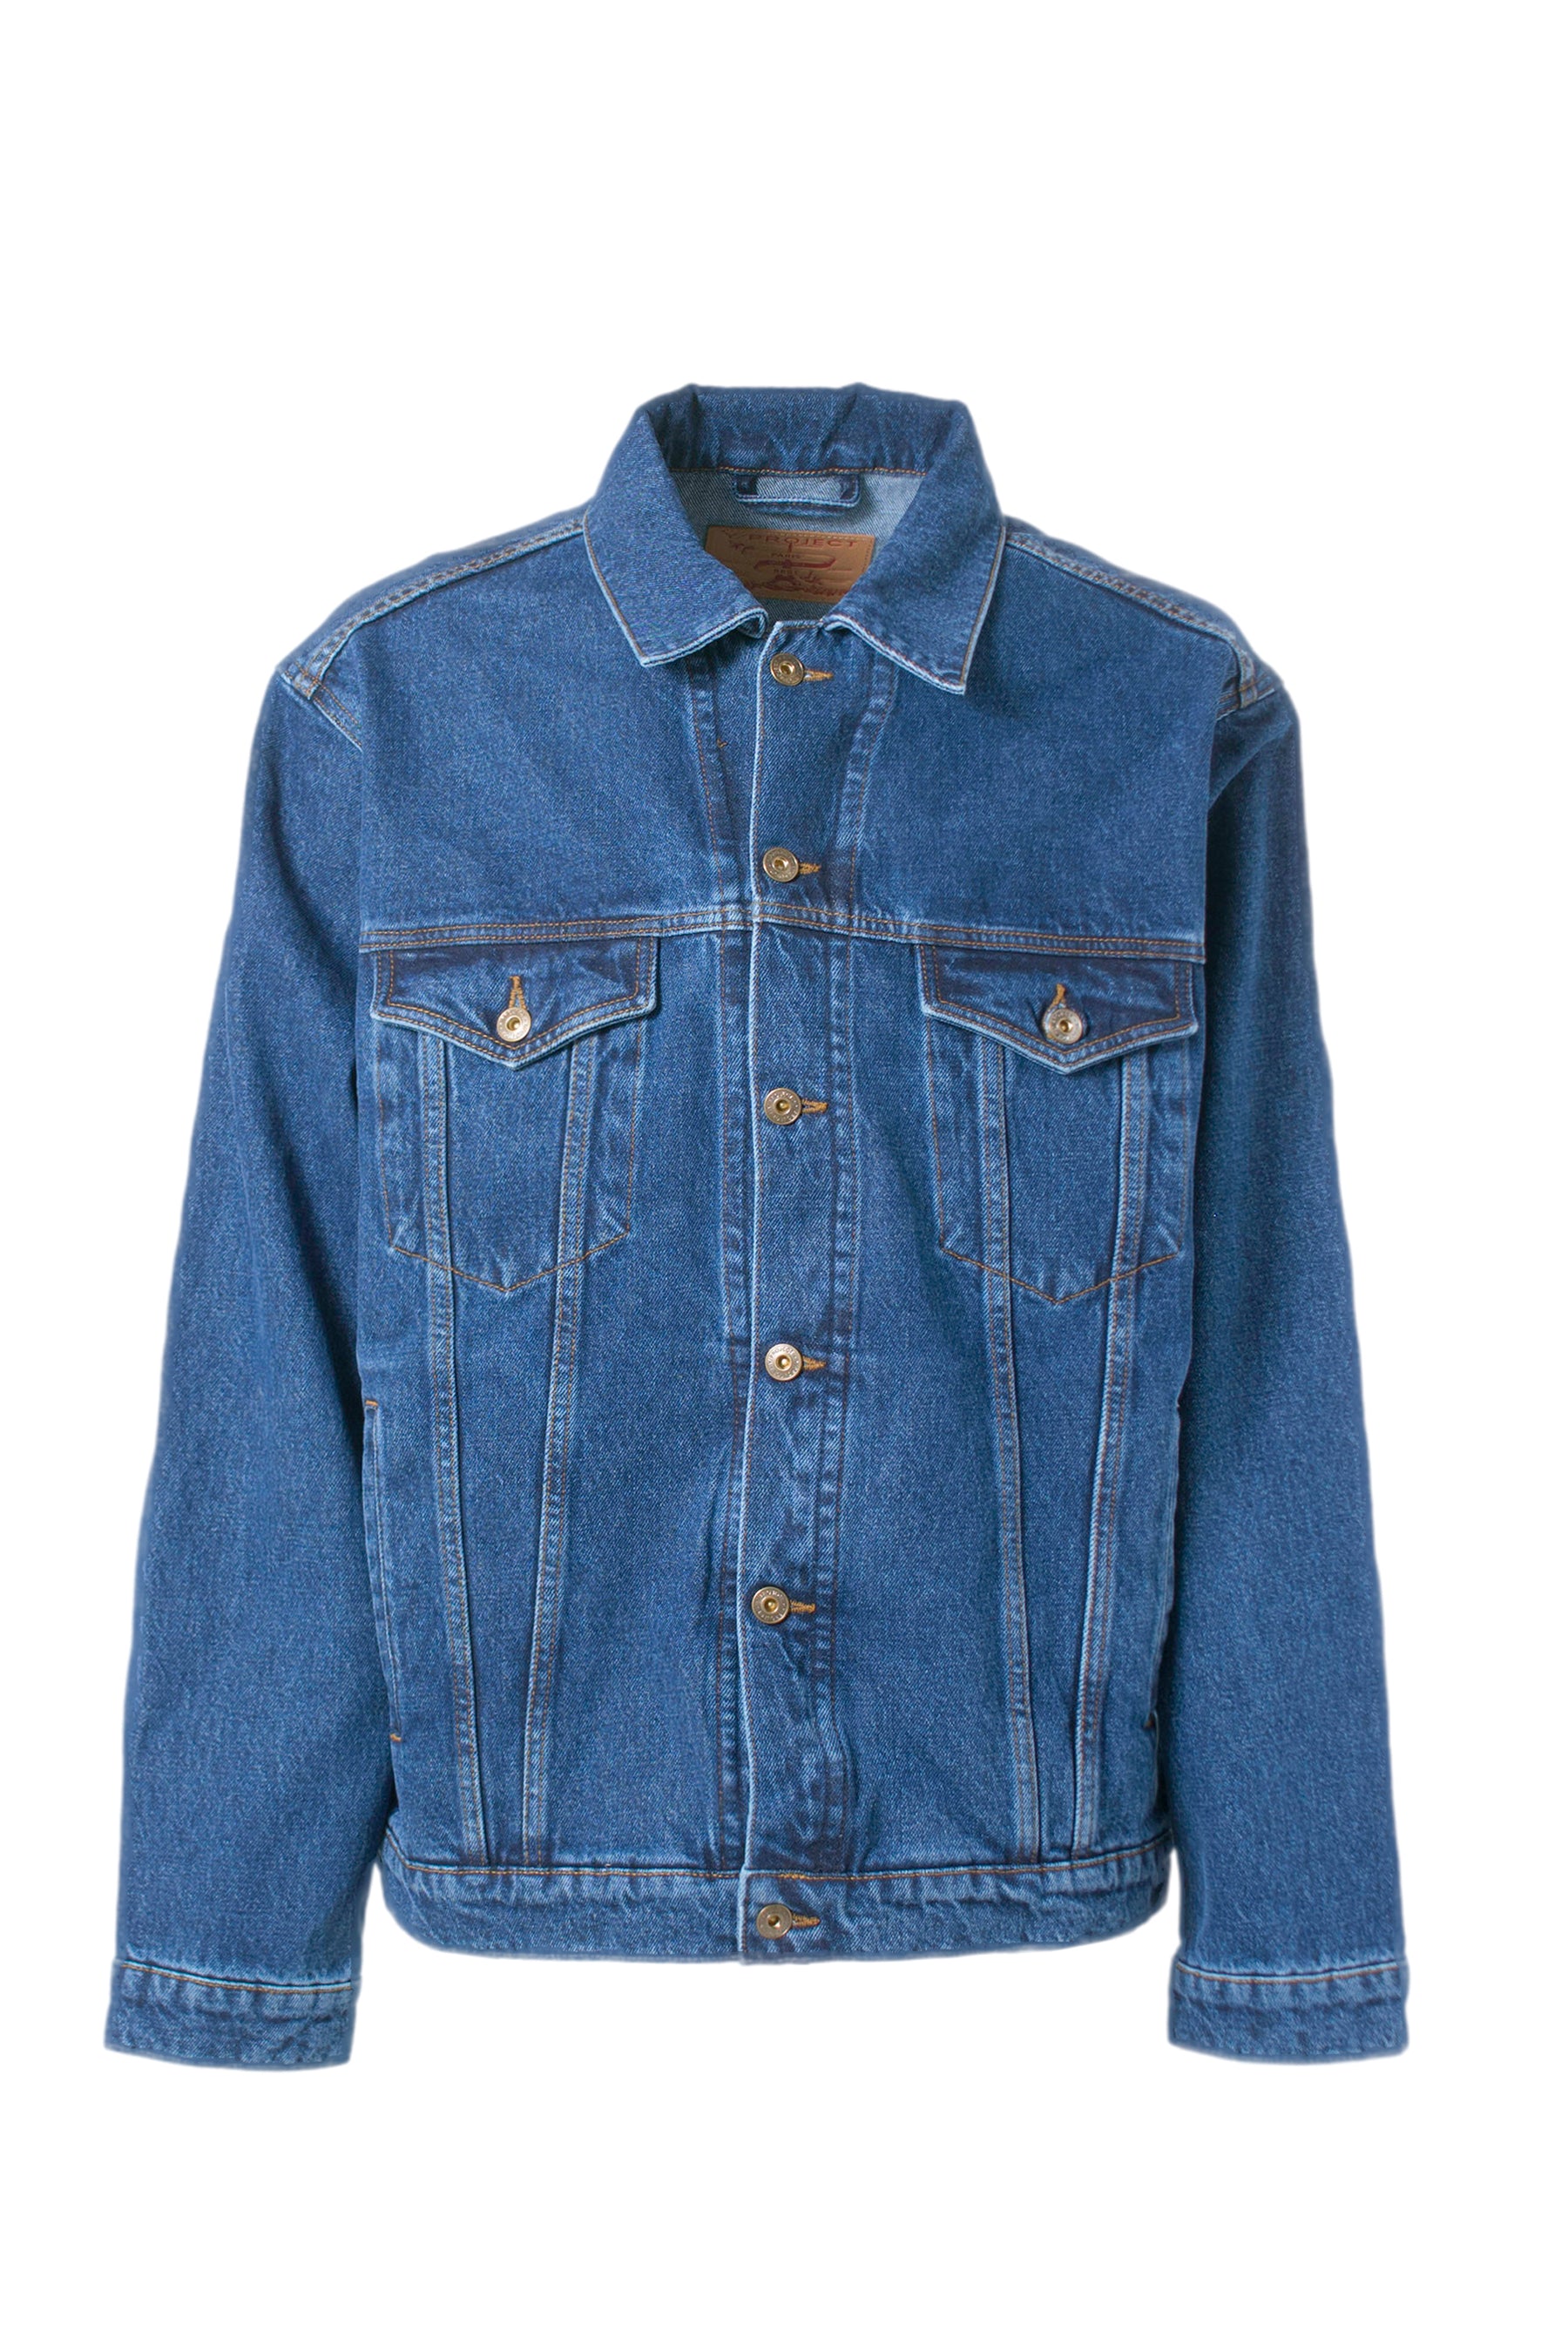 Y/Project ワイプロジェクト SS23 CLASSIC WIRE DENIM JACKET / NVY